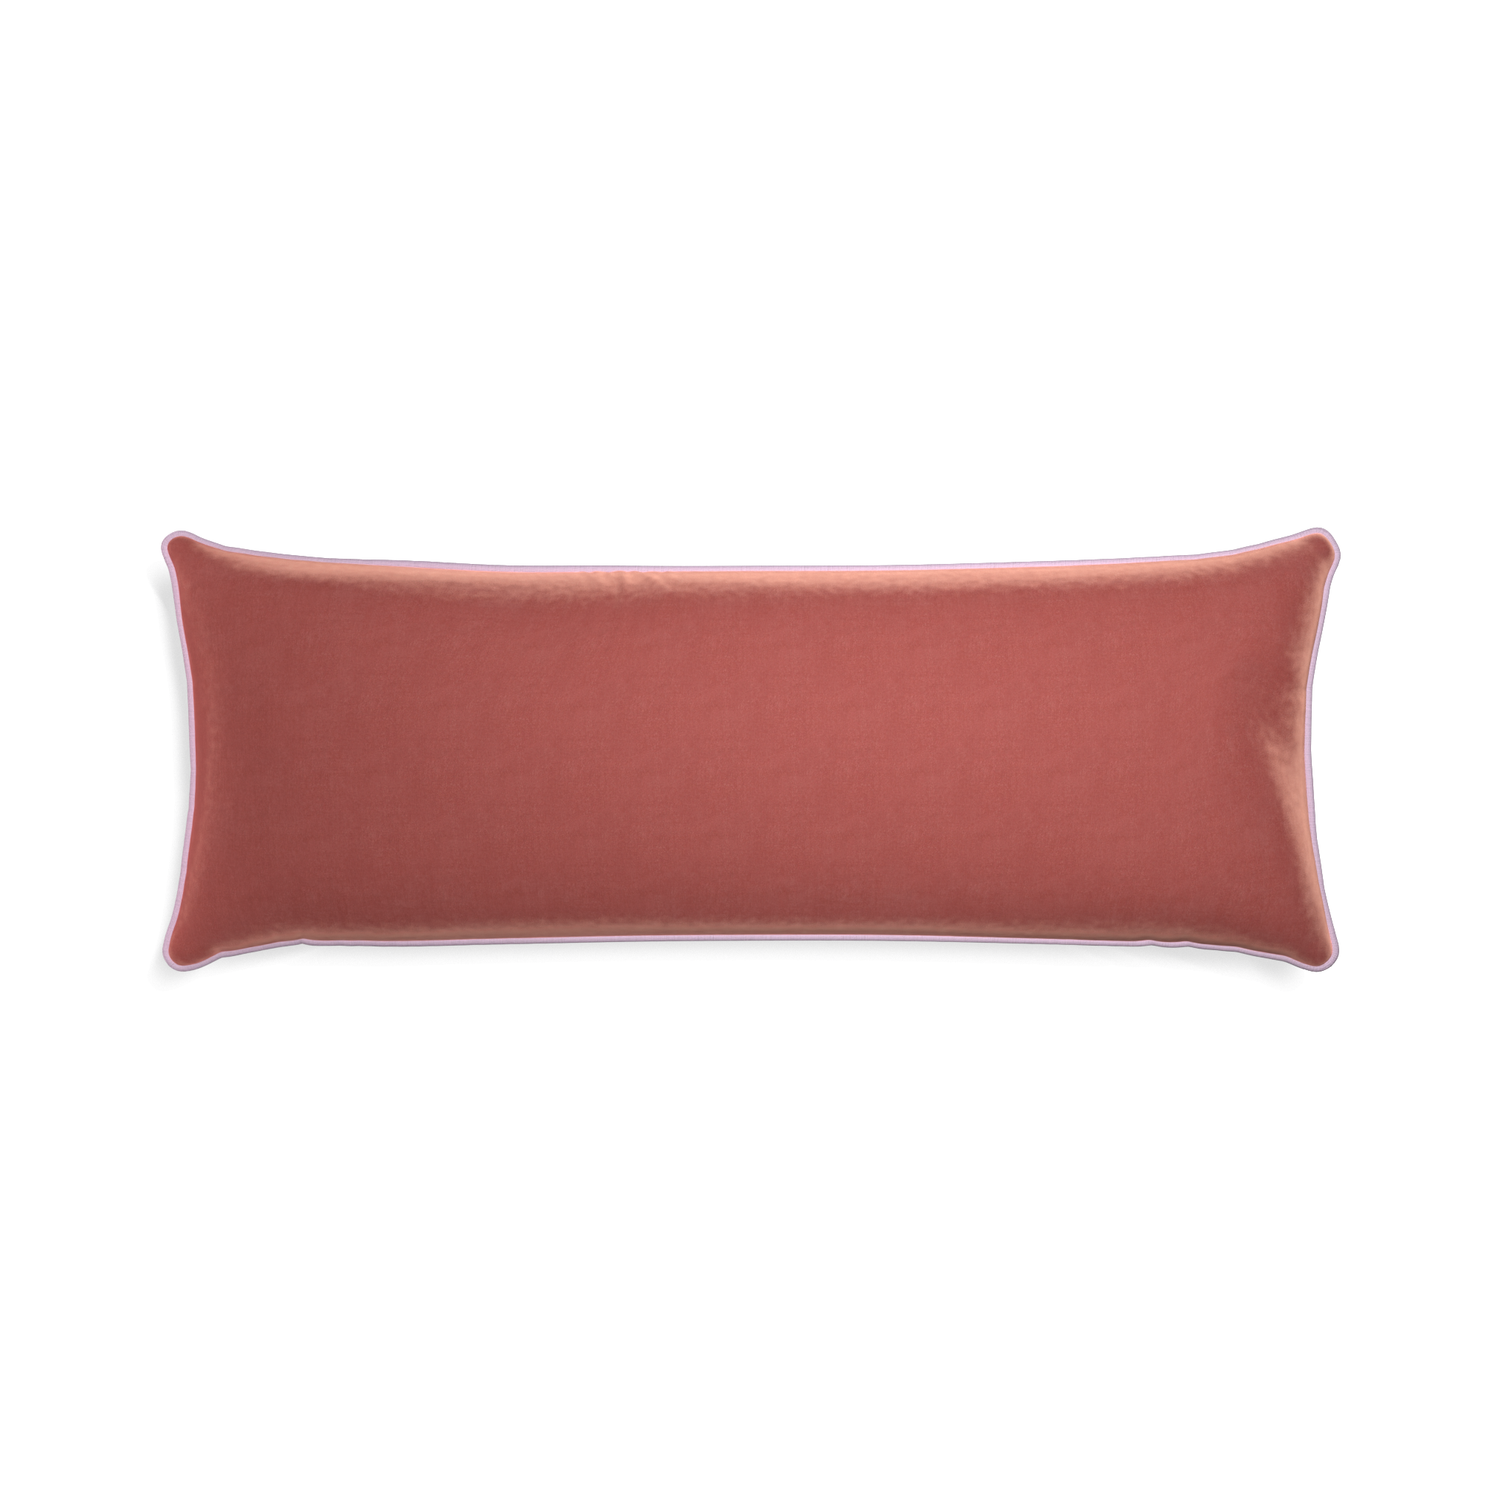 Xl-lumbar cosmo velvet custom coralpillow with l piping on white background